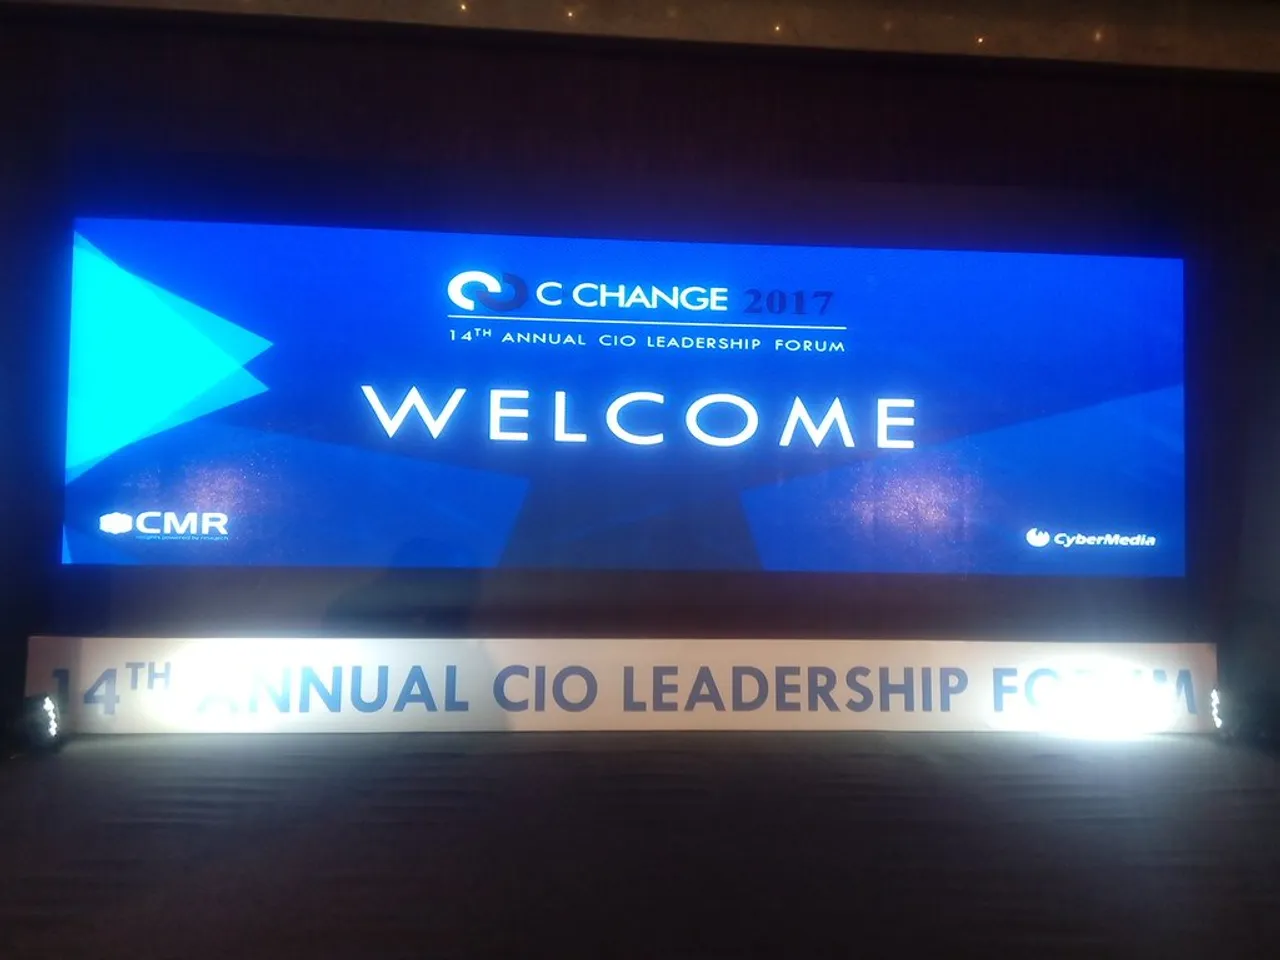 CIOL CCHANGE 2017: Rethinking technology from organizational perspective